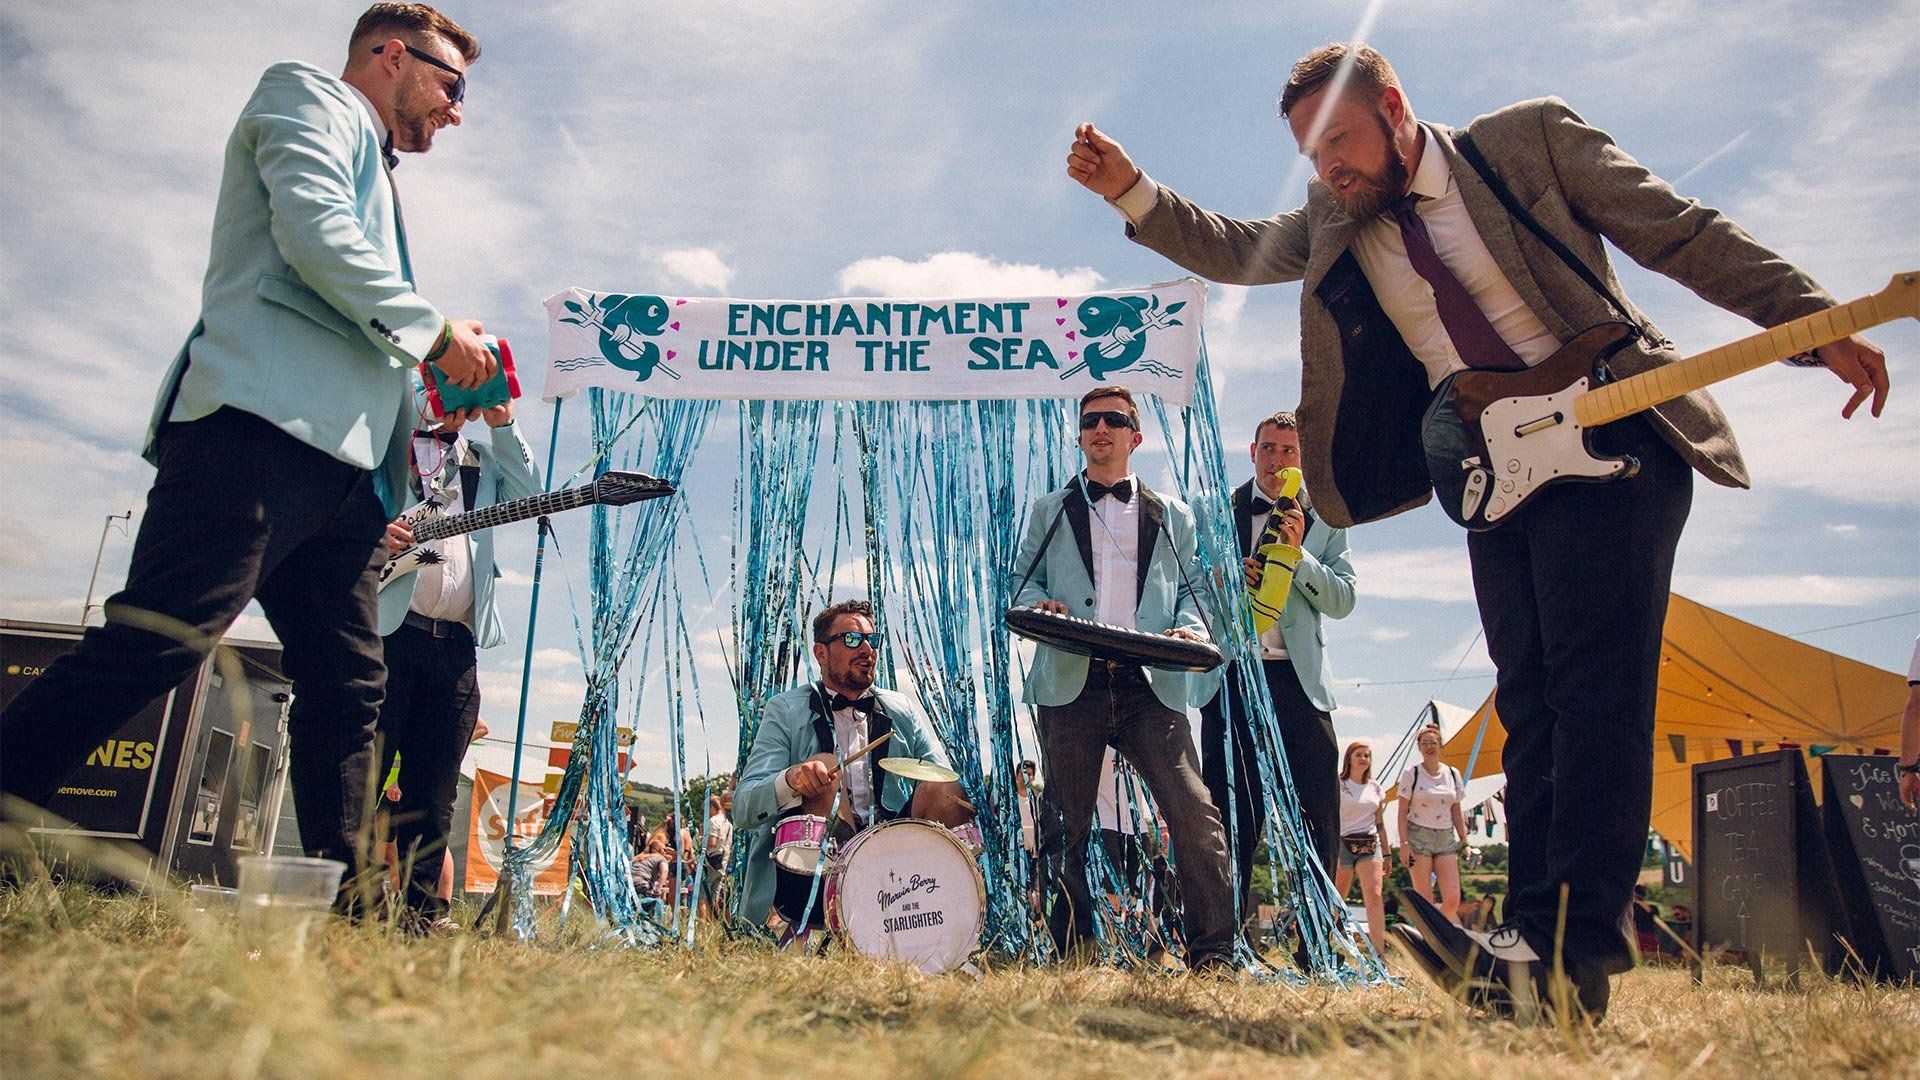 Men in blue jackets and bow ties pretend to play inflatable instruments in a field. Photo by Ben Morse.